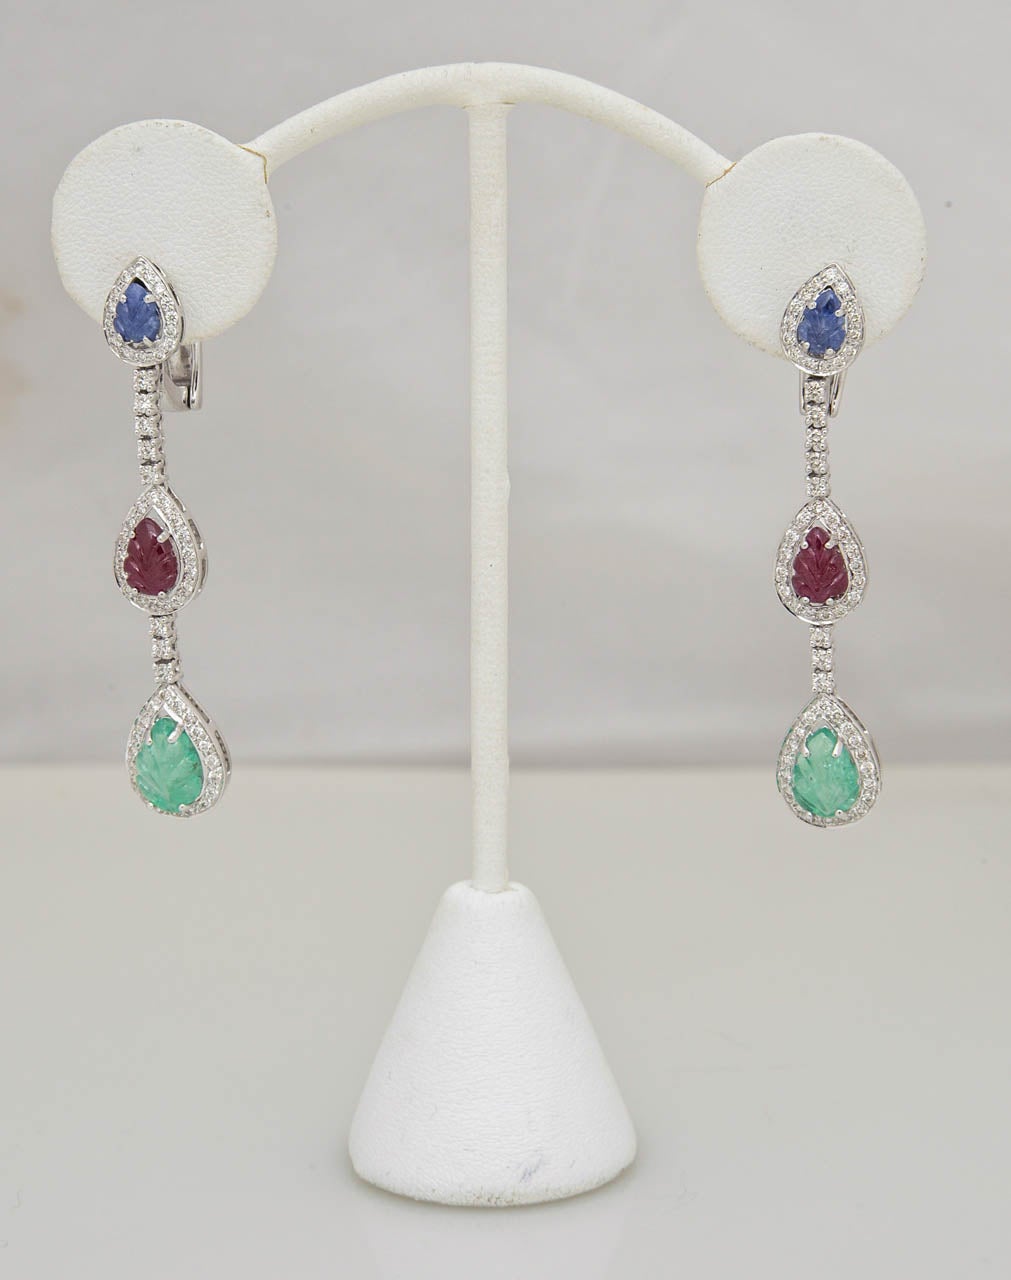 Contemporary Tutti Fruitti Style earrings with carved emerald, ruby and sapphire leaves set into diamond frames on a diamond chain set in 18k white gold.

Can be worn with or without the posts since the posts hinge down